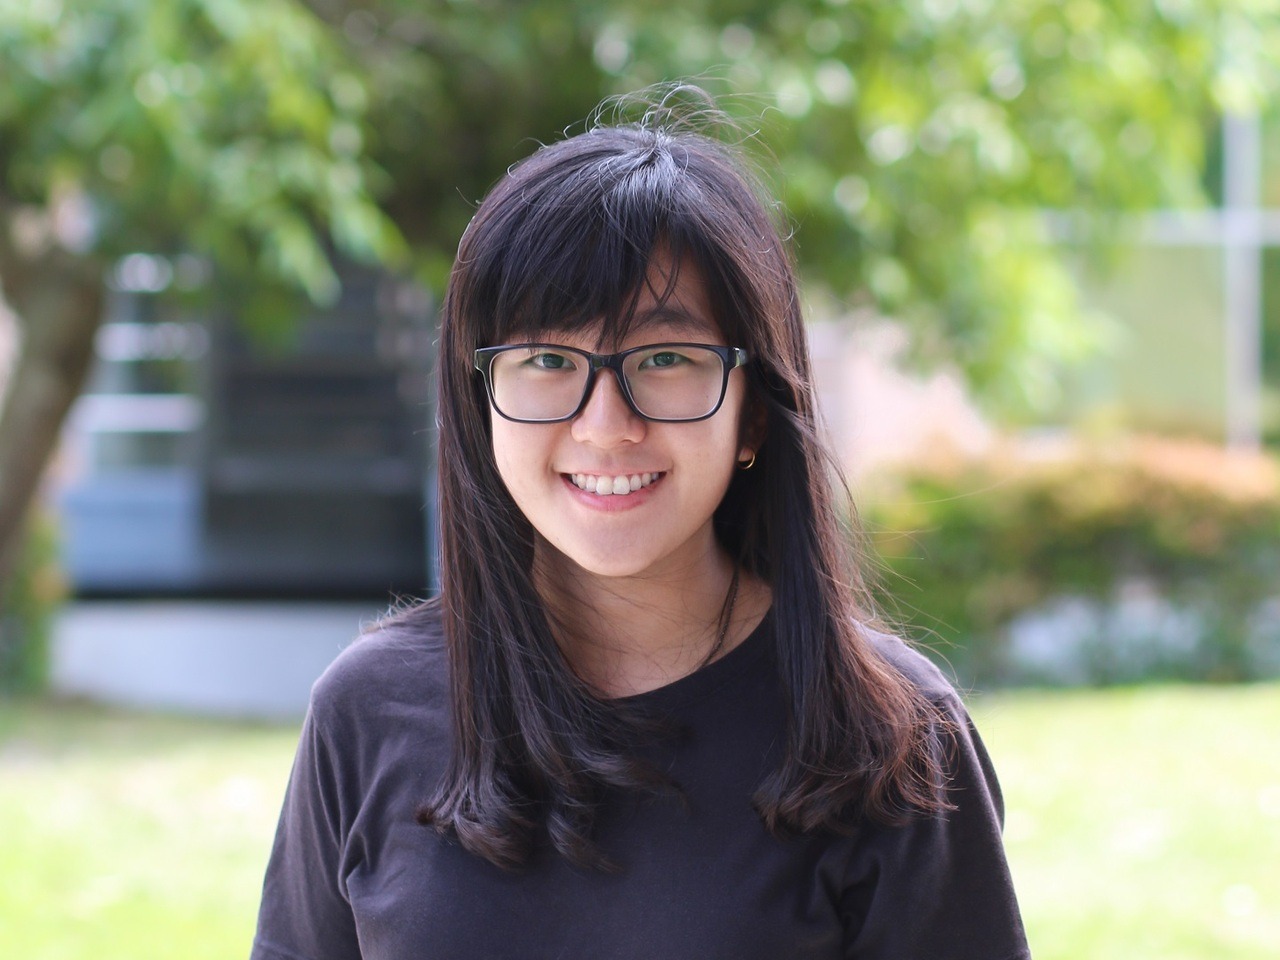 “It was not easy leaving my hometown of Kuching to study here at Curtin Malaysia. The thought of leaving my family and having to live on my own was very daunting. But now I know I worried needlessly. Rather than regretting or suffering because of my...